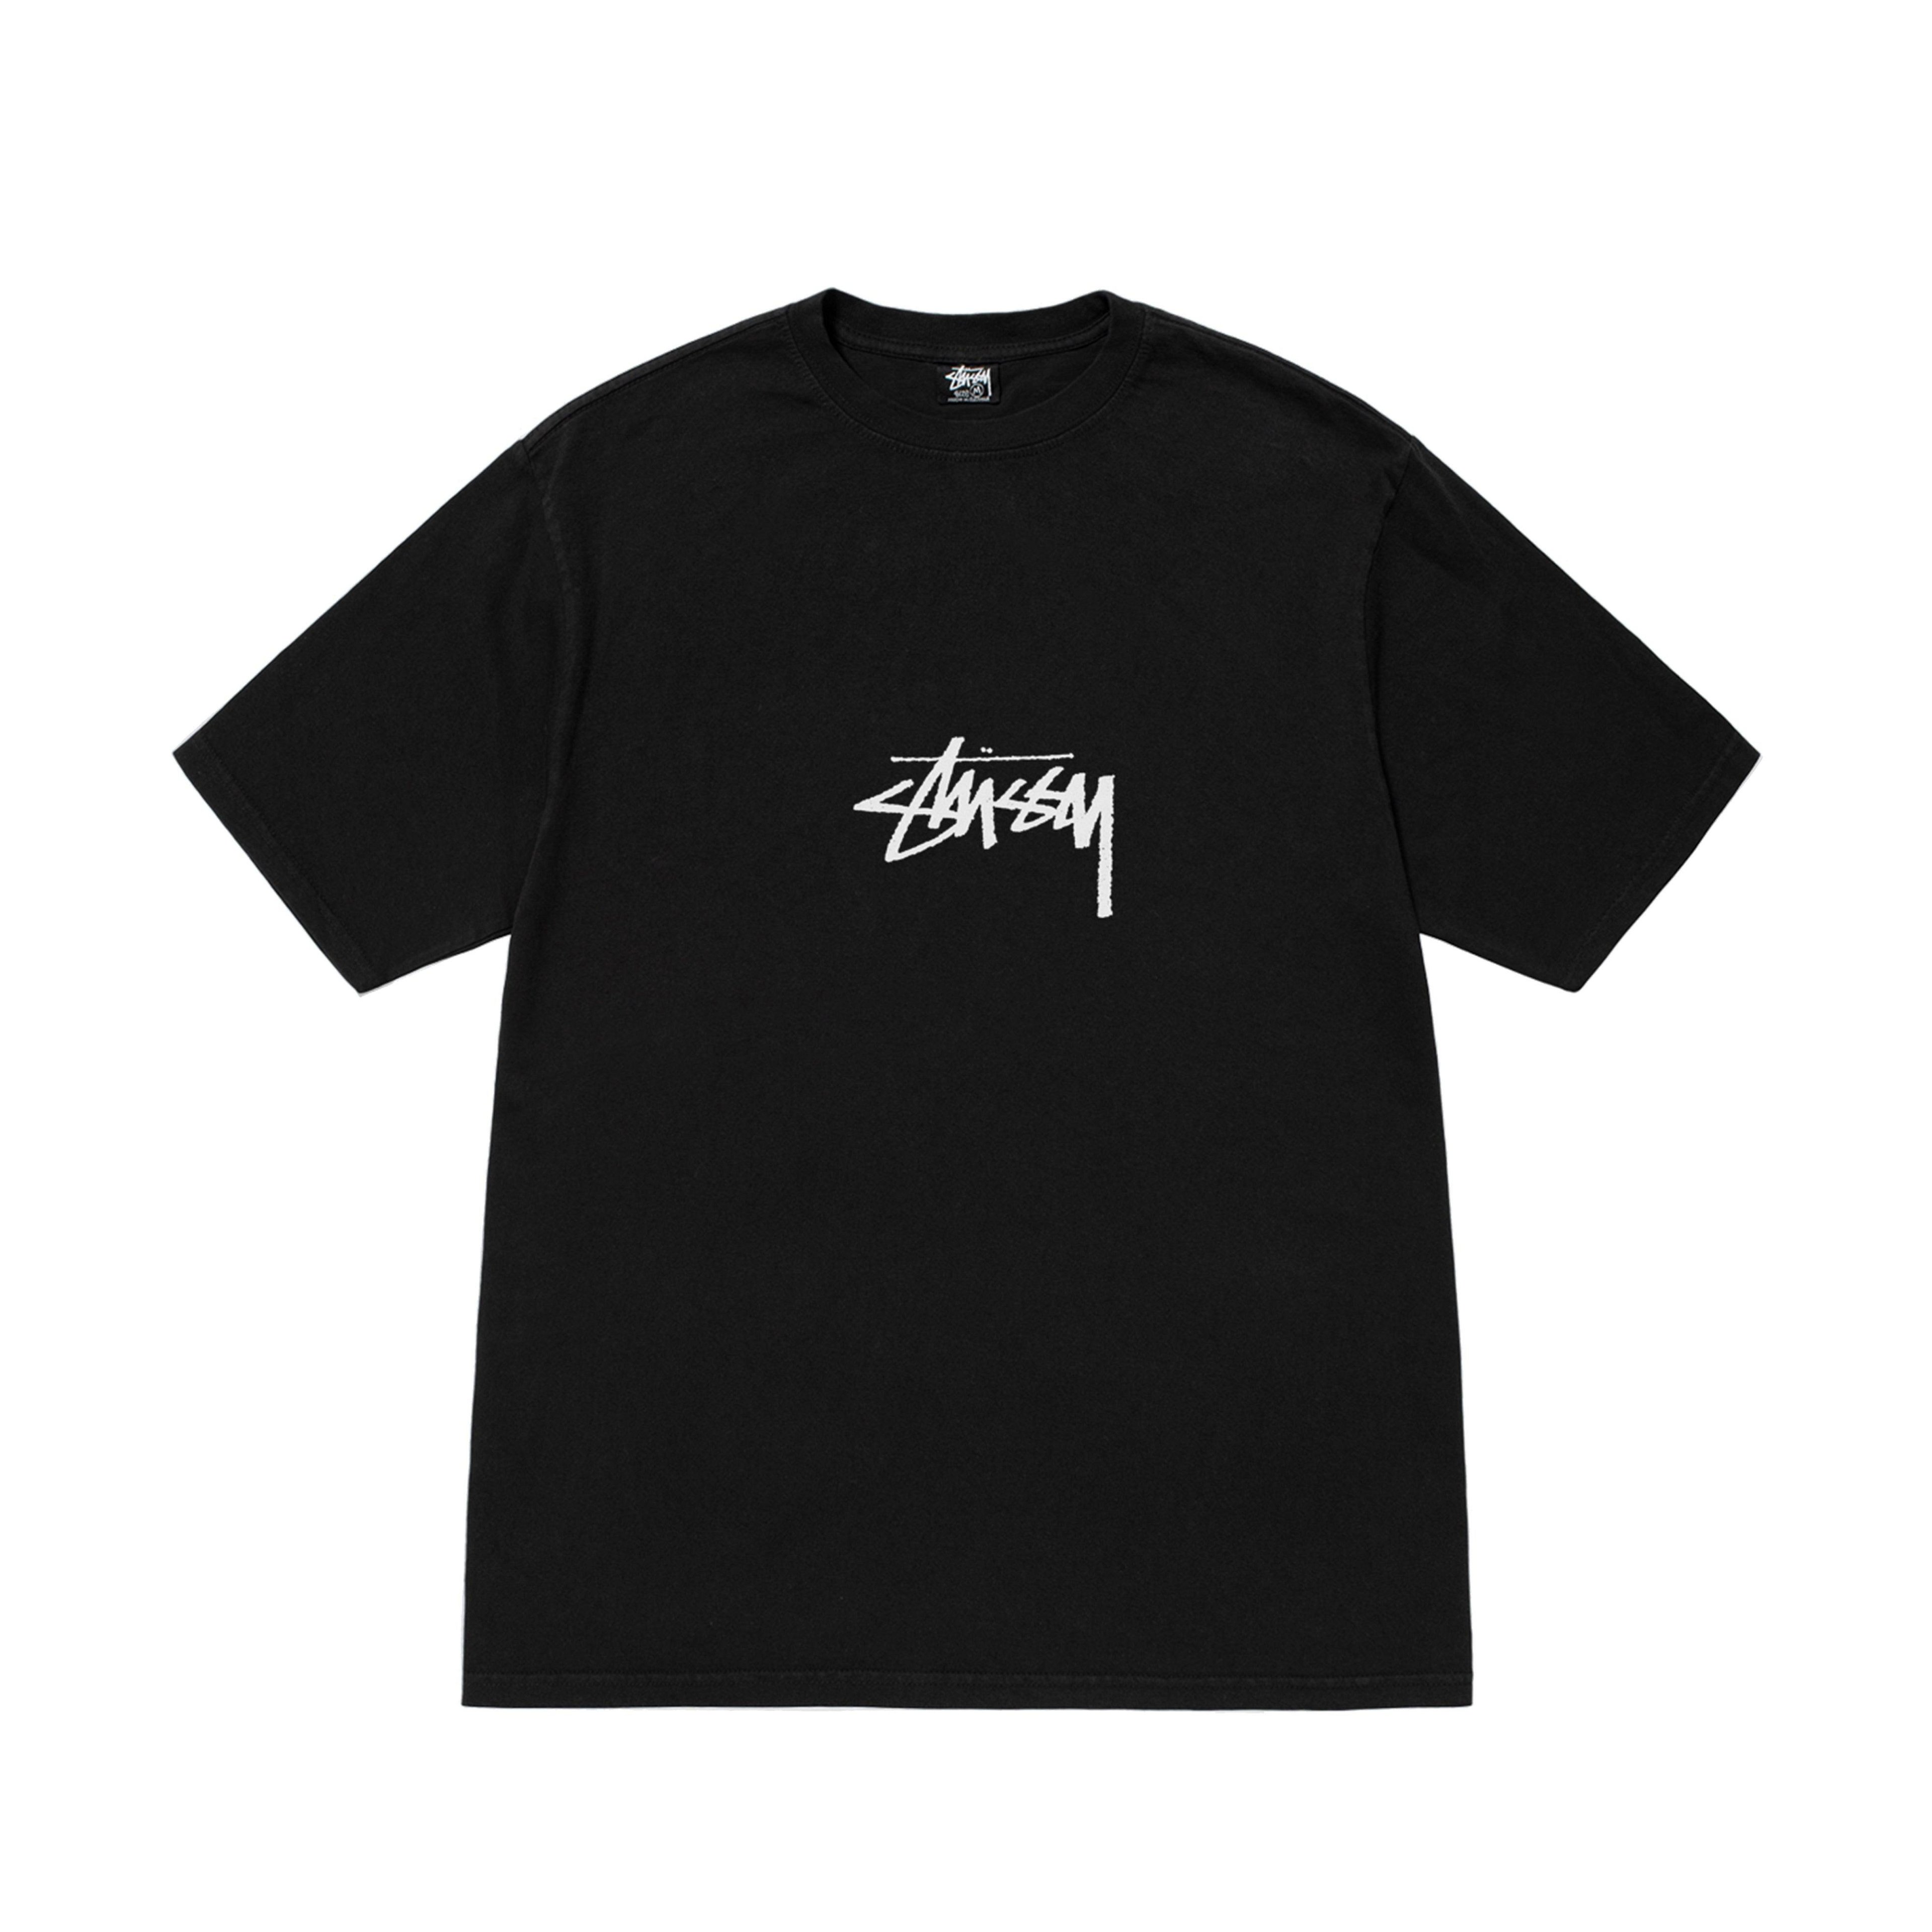 Stüssy - Men's Small Stock Pig. Dyed Tee - (Black) by STUSSY